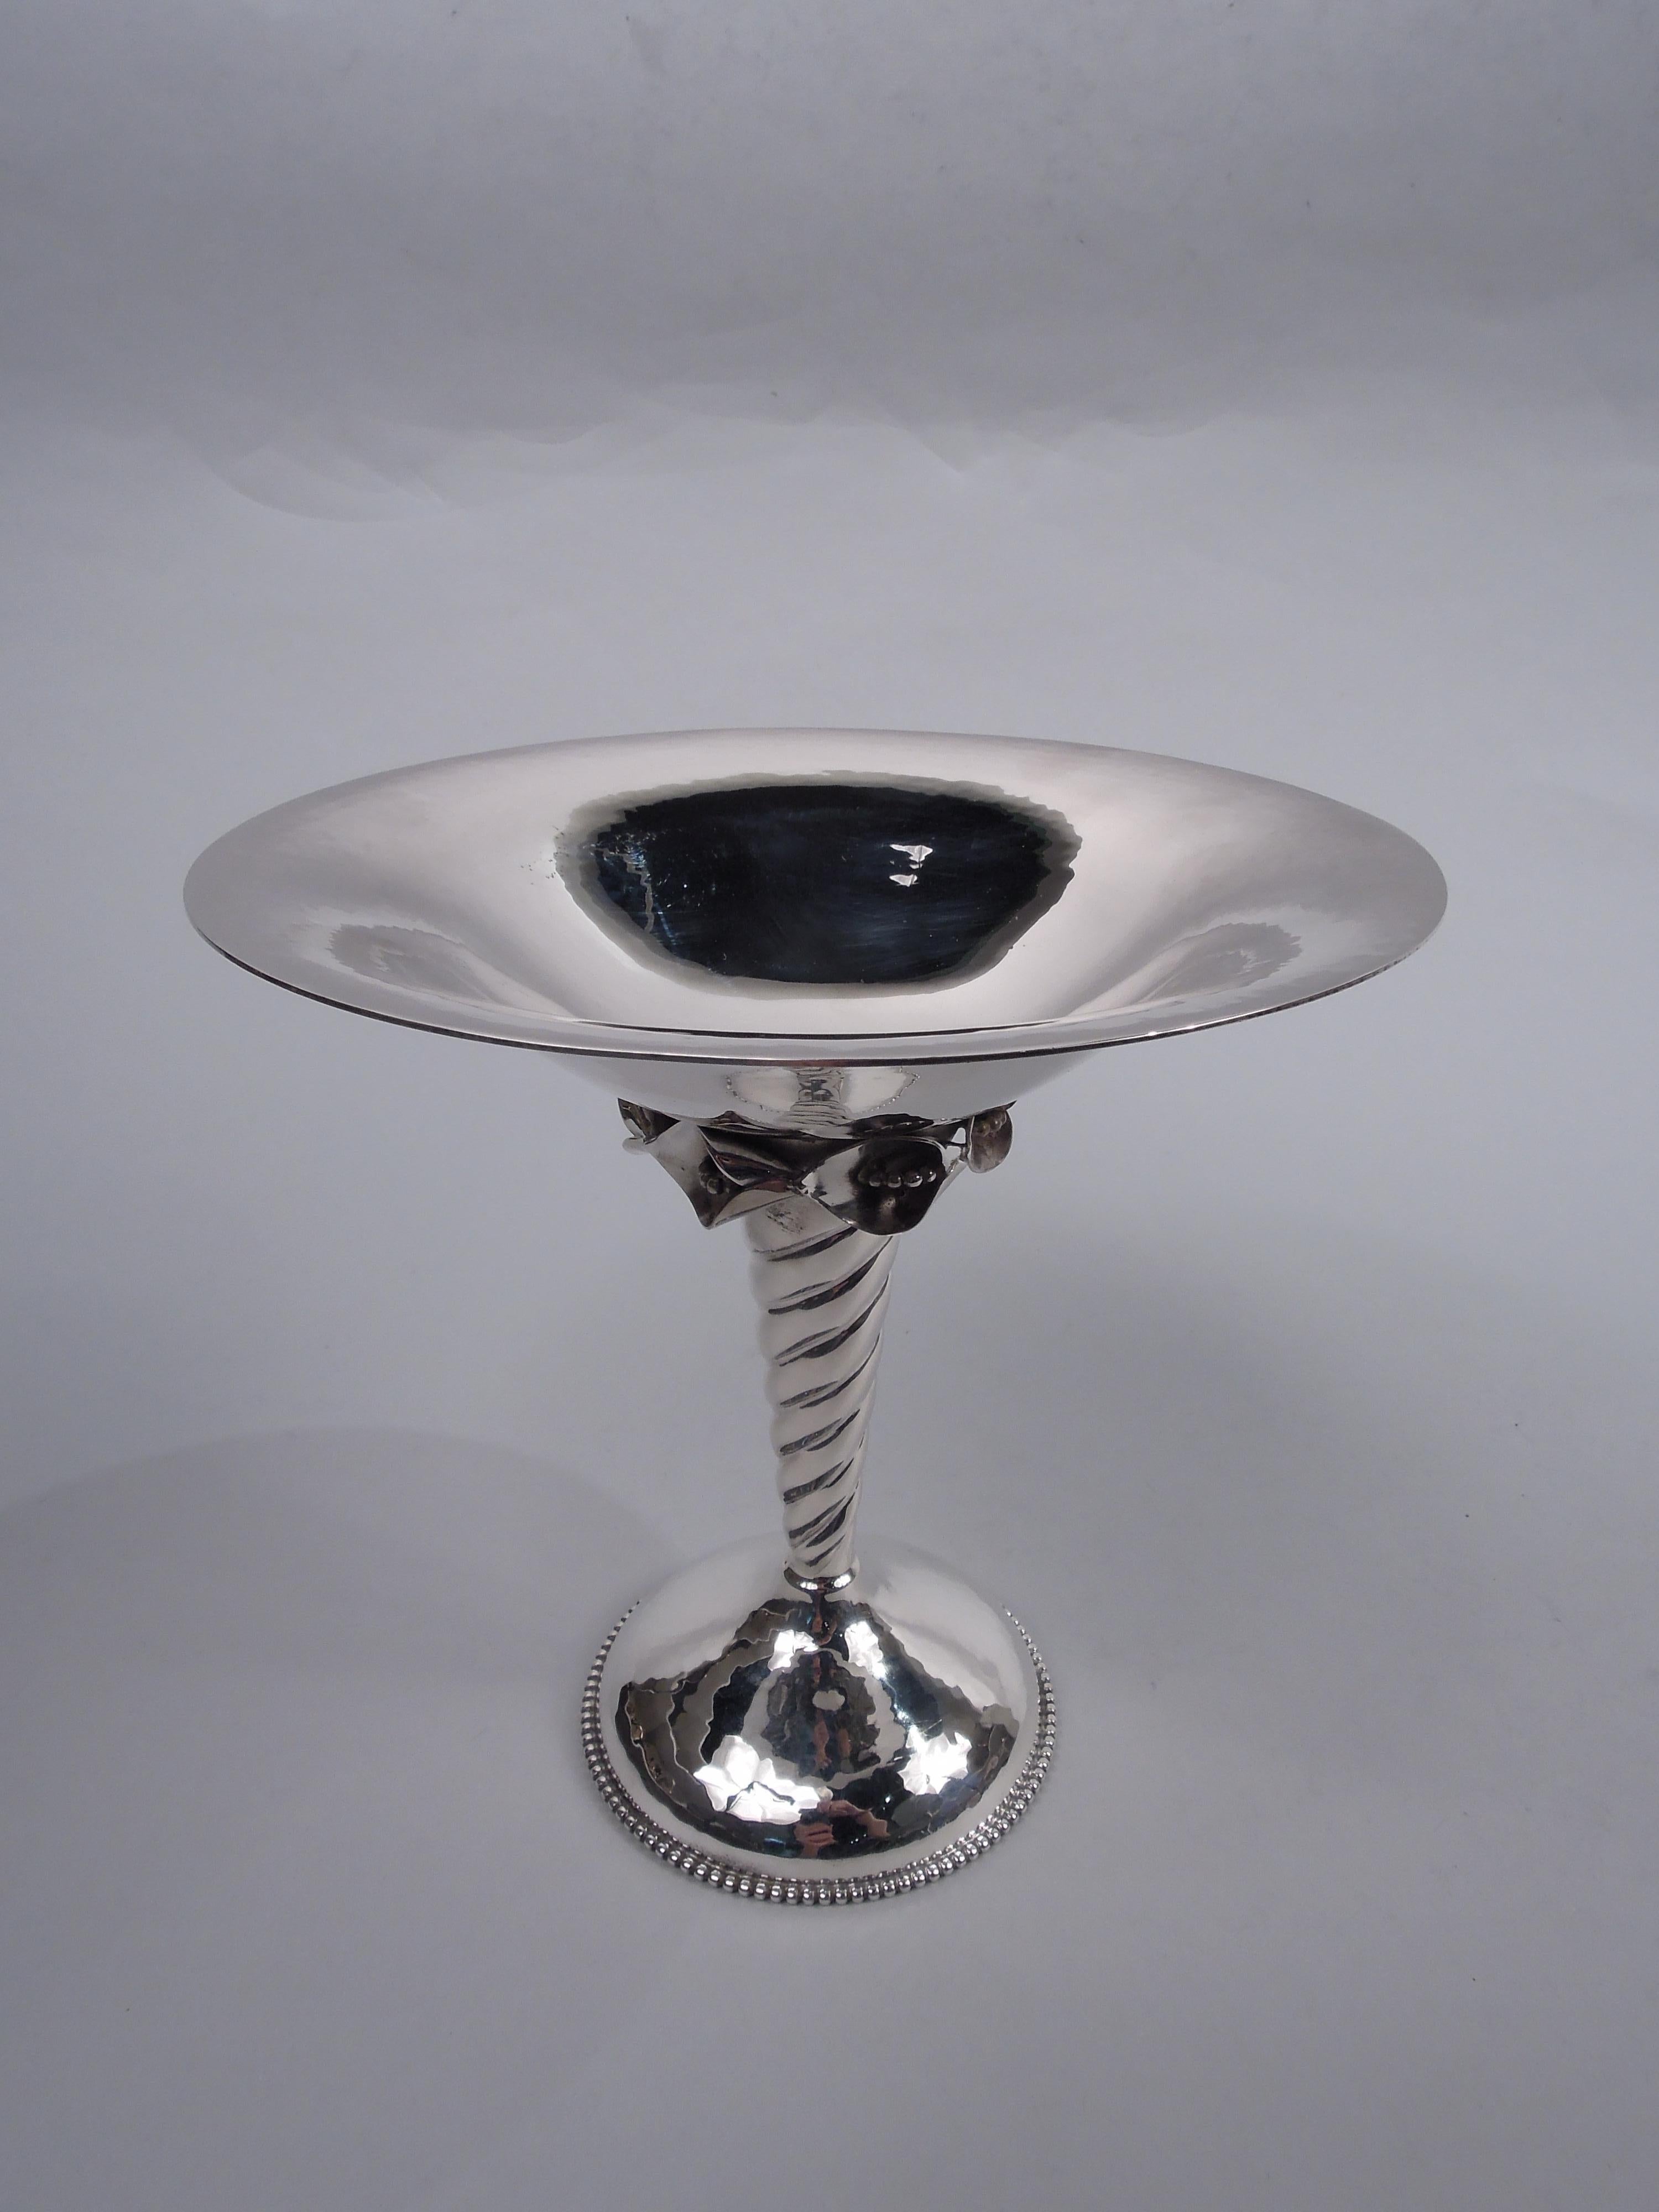 Midcentury Modern sterling silver compote. Made by William G. DeMatteo in Bergenfield, New Jersey. Round and wide bowl on twisted shaft mounted to domed and beaded foot. Mounted to bowl underside is floral band comprising seed-spilling buds. Visible